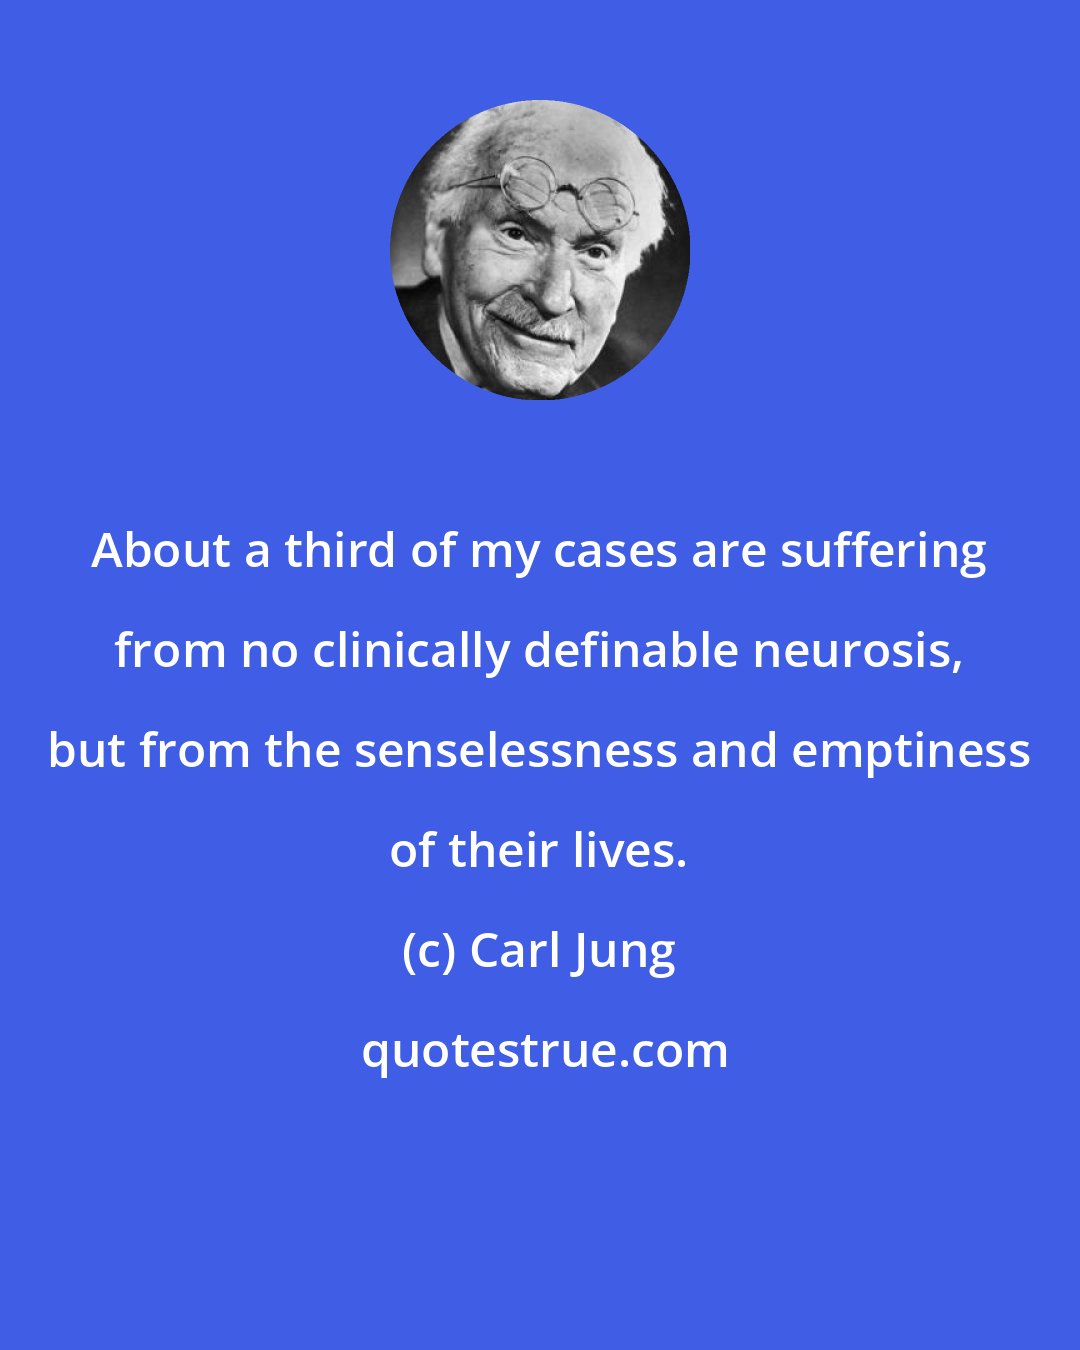 Carl Jung: About a third of my cases are suffering from no clinically definable neurosis, but from the senselessness and emptiness of their lives.